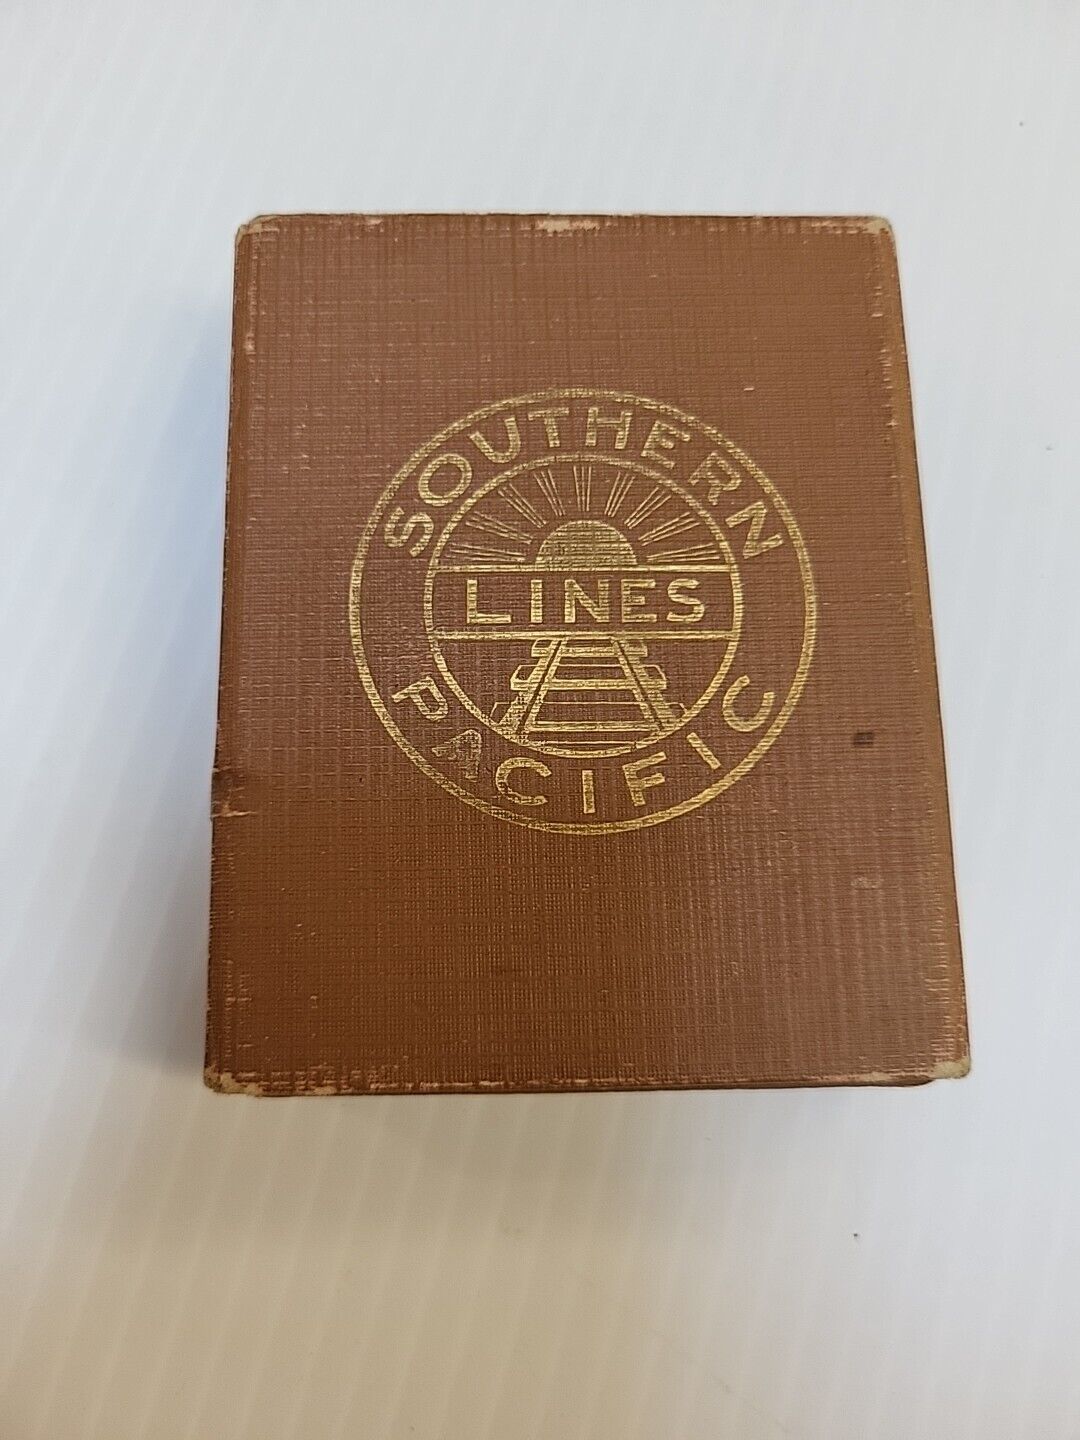 Vintage Southern Pacific Lines Souvenir Playing Cards 1943 Train Railroad Scenes